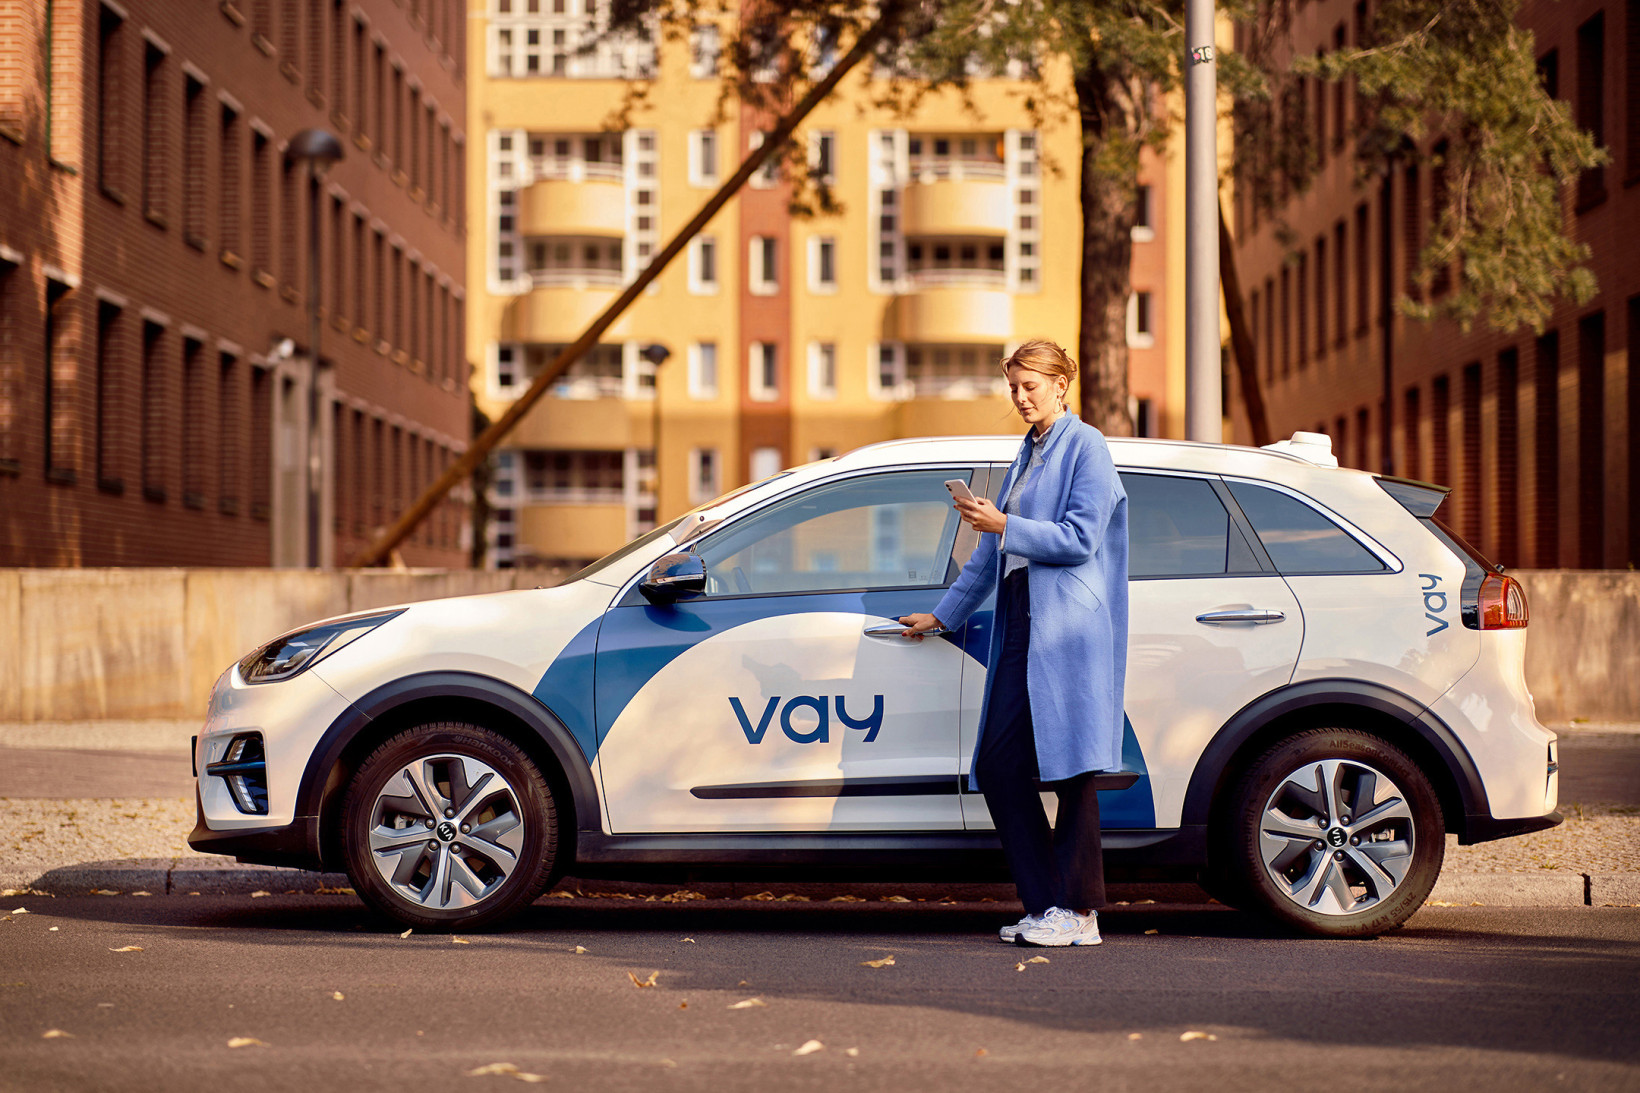 Vay's technology has been installed in Kia electric vehicles.  Credit: Vay